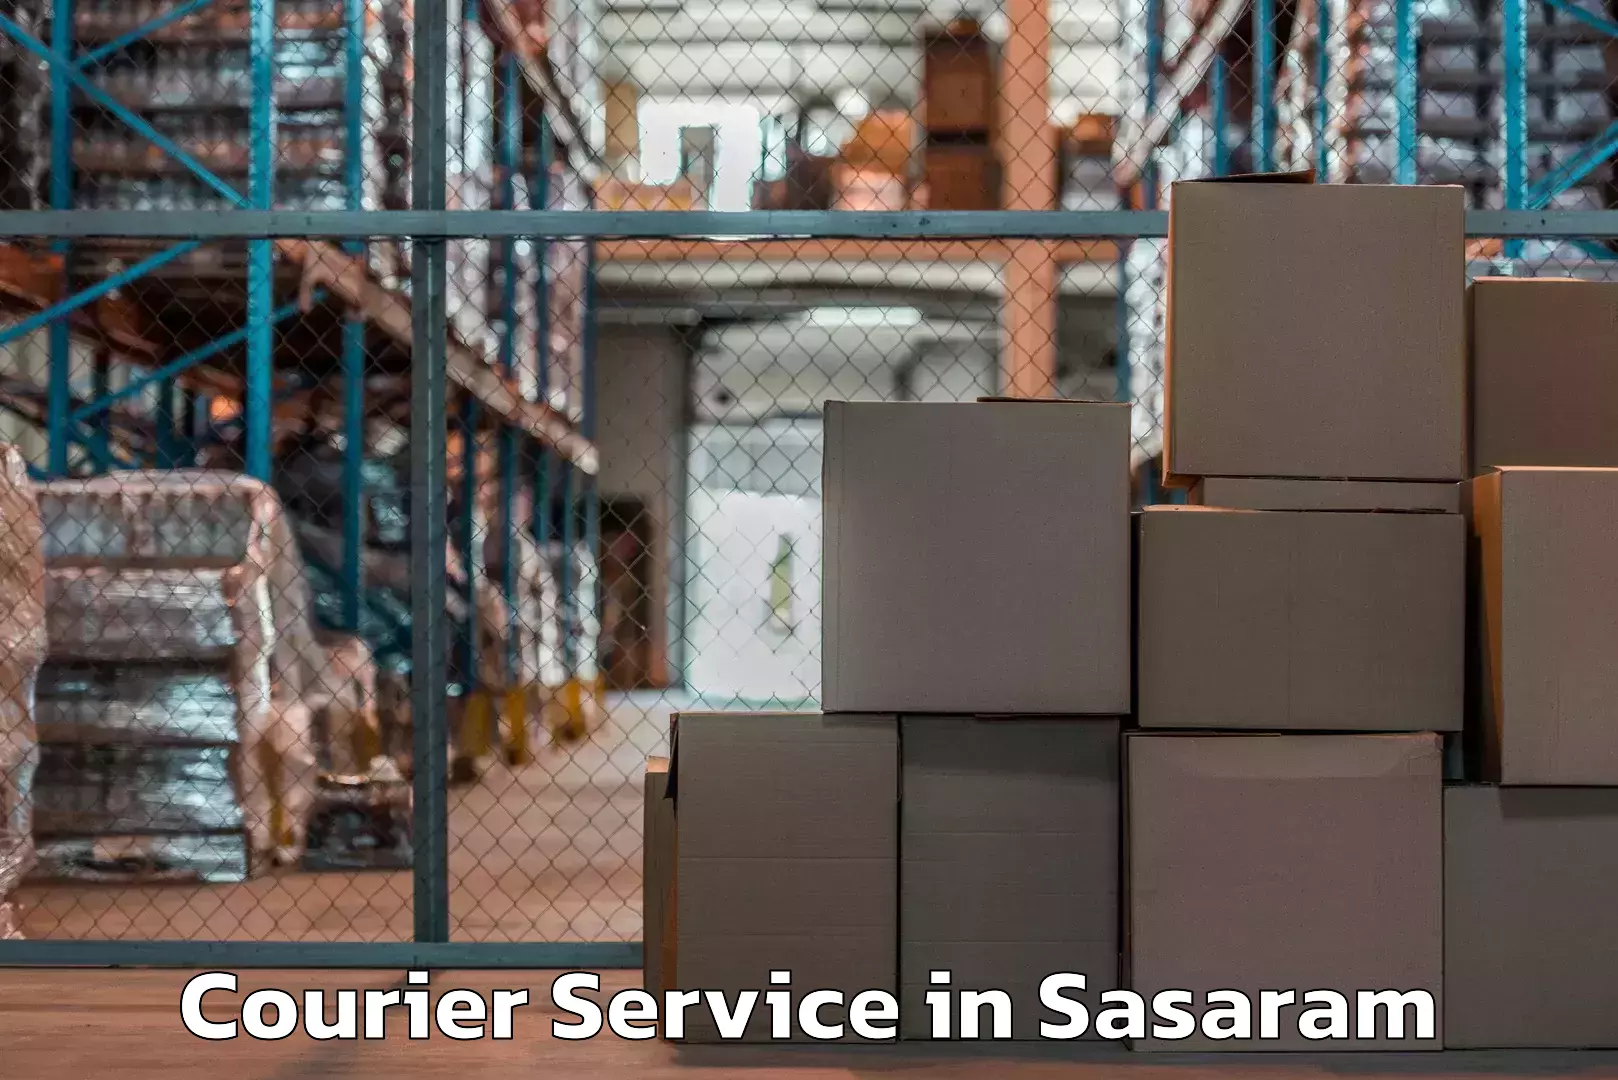 Local courier options in Sasaram